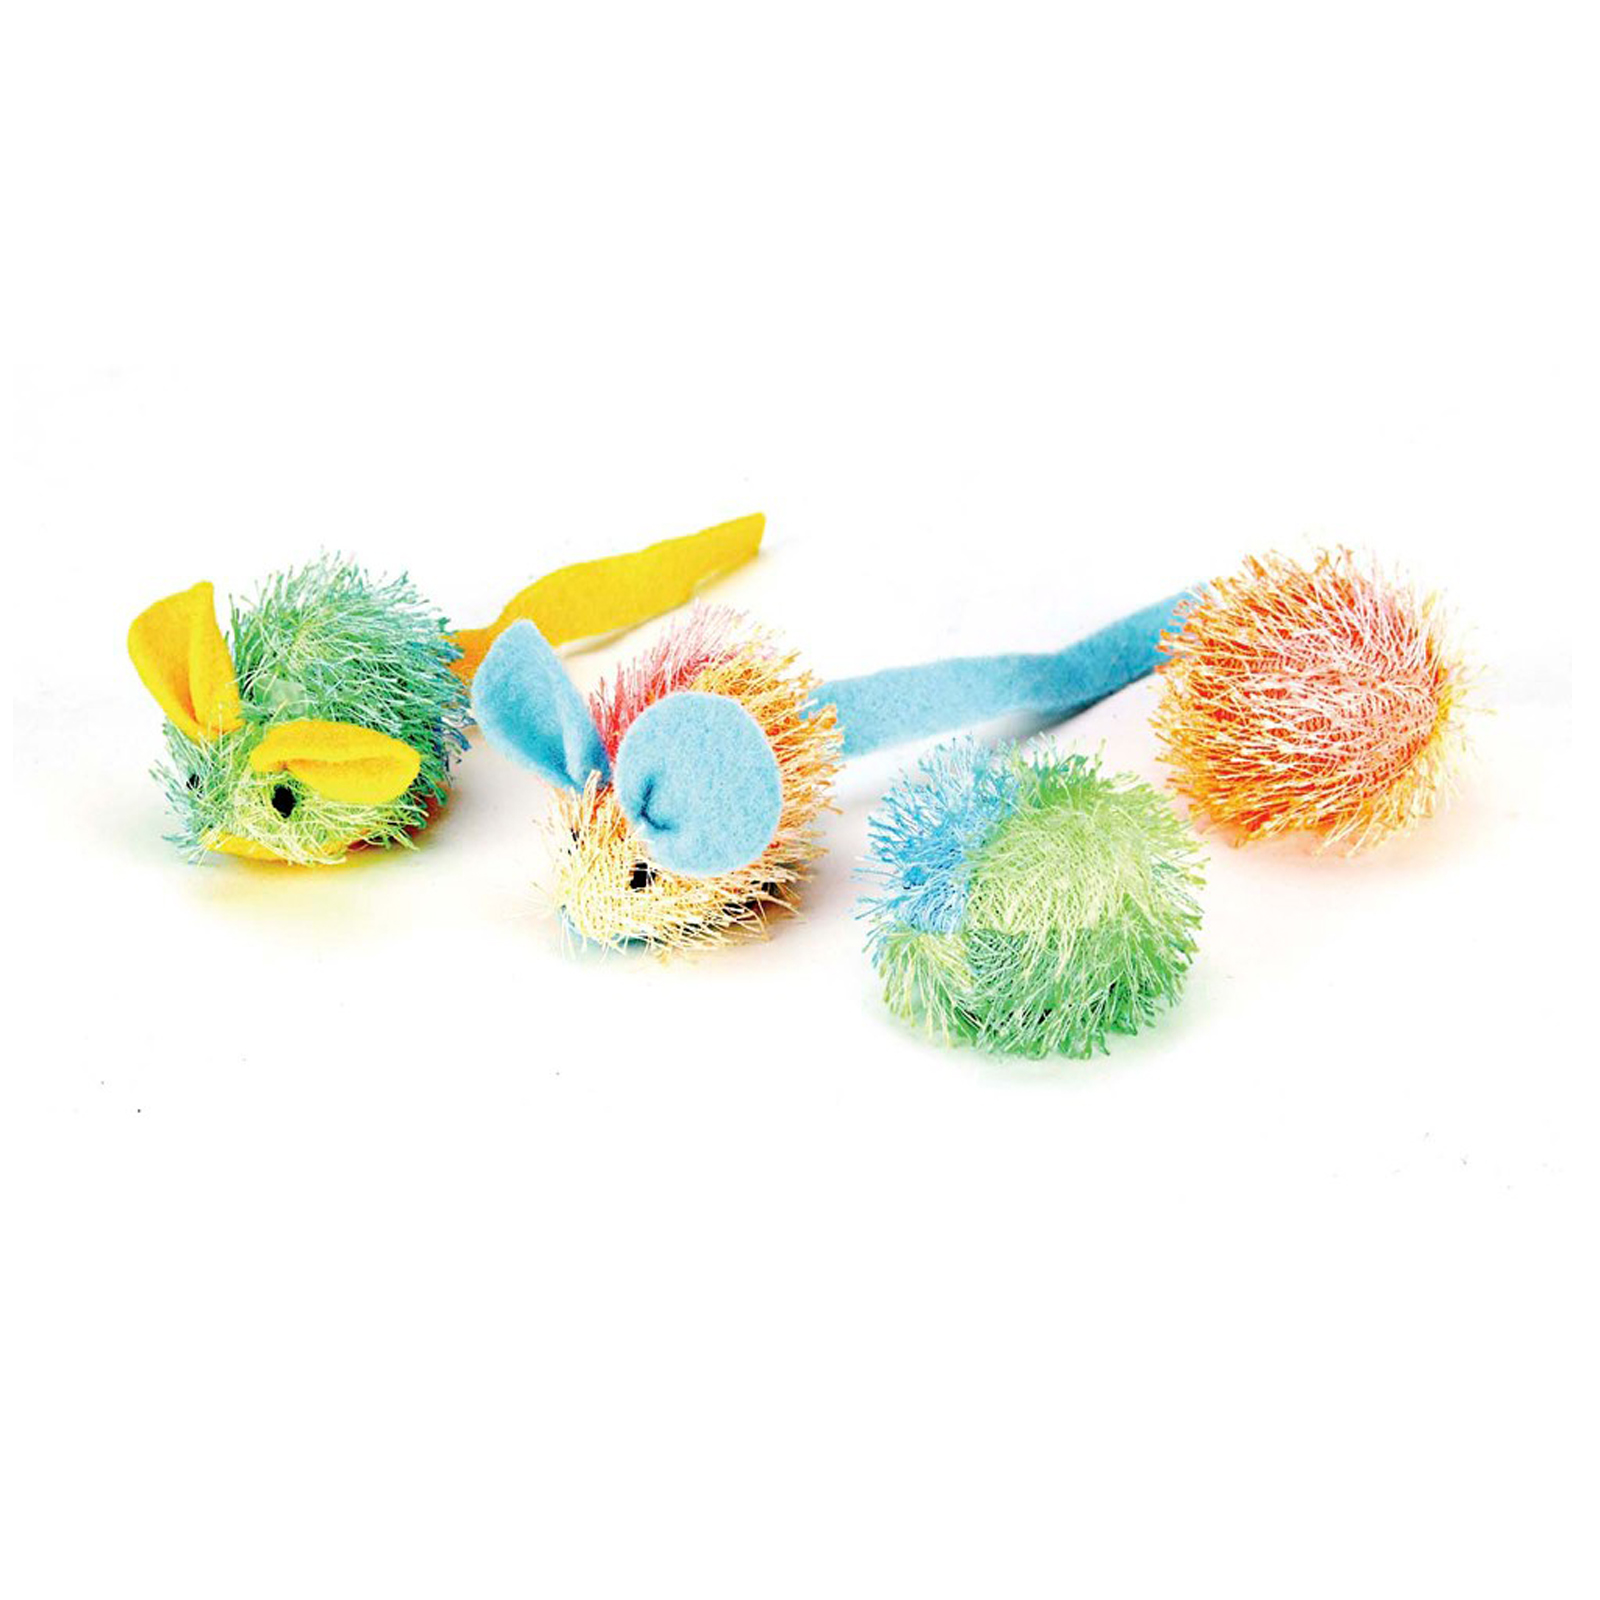 Ethical Products Inc. Toy Stringy Mice and Ball w/Catnip